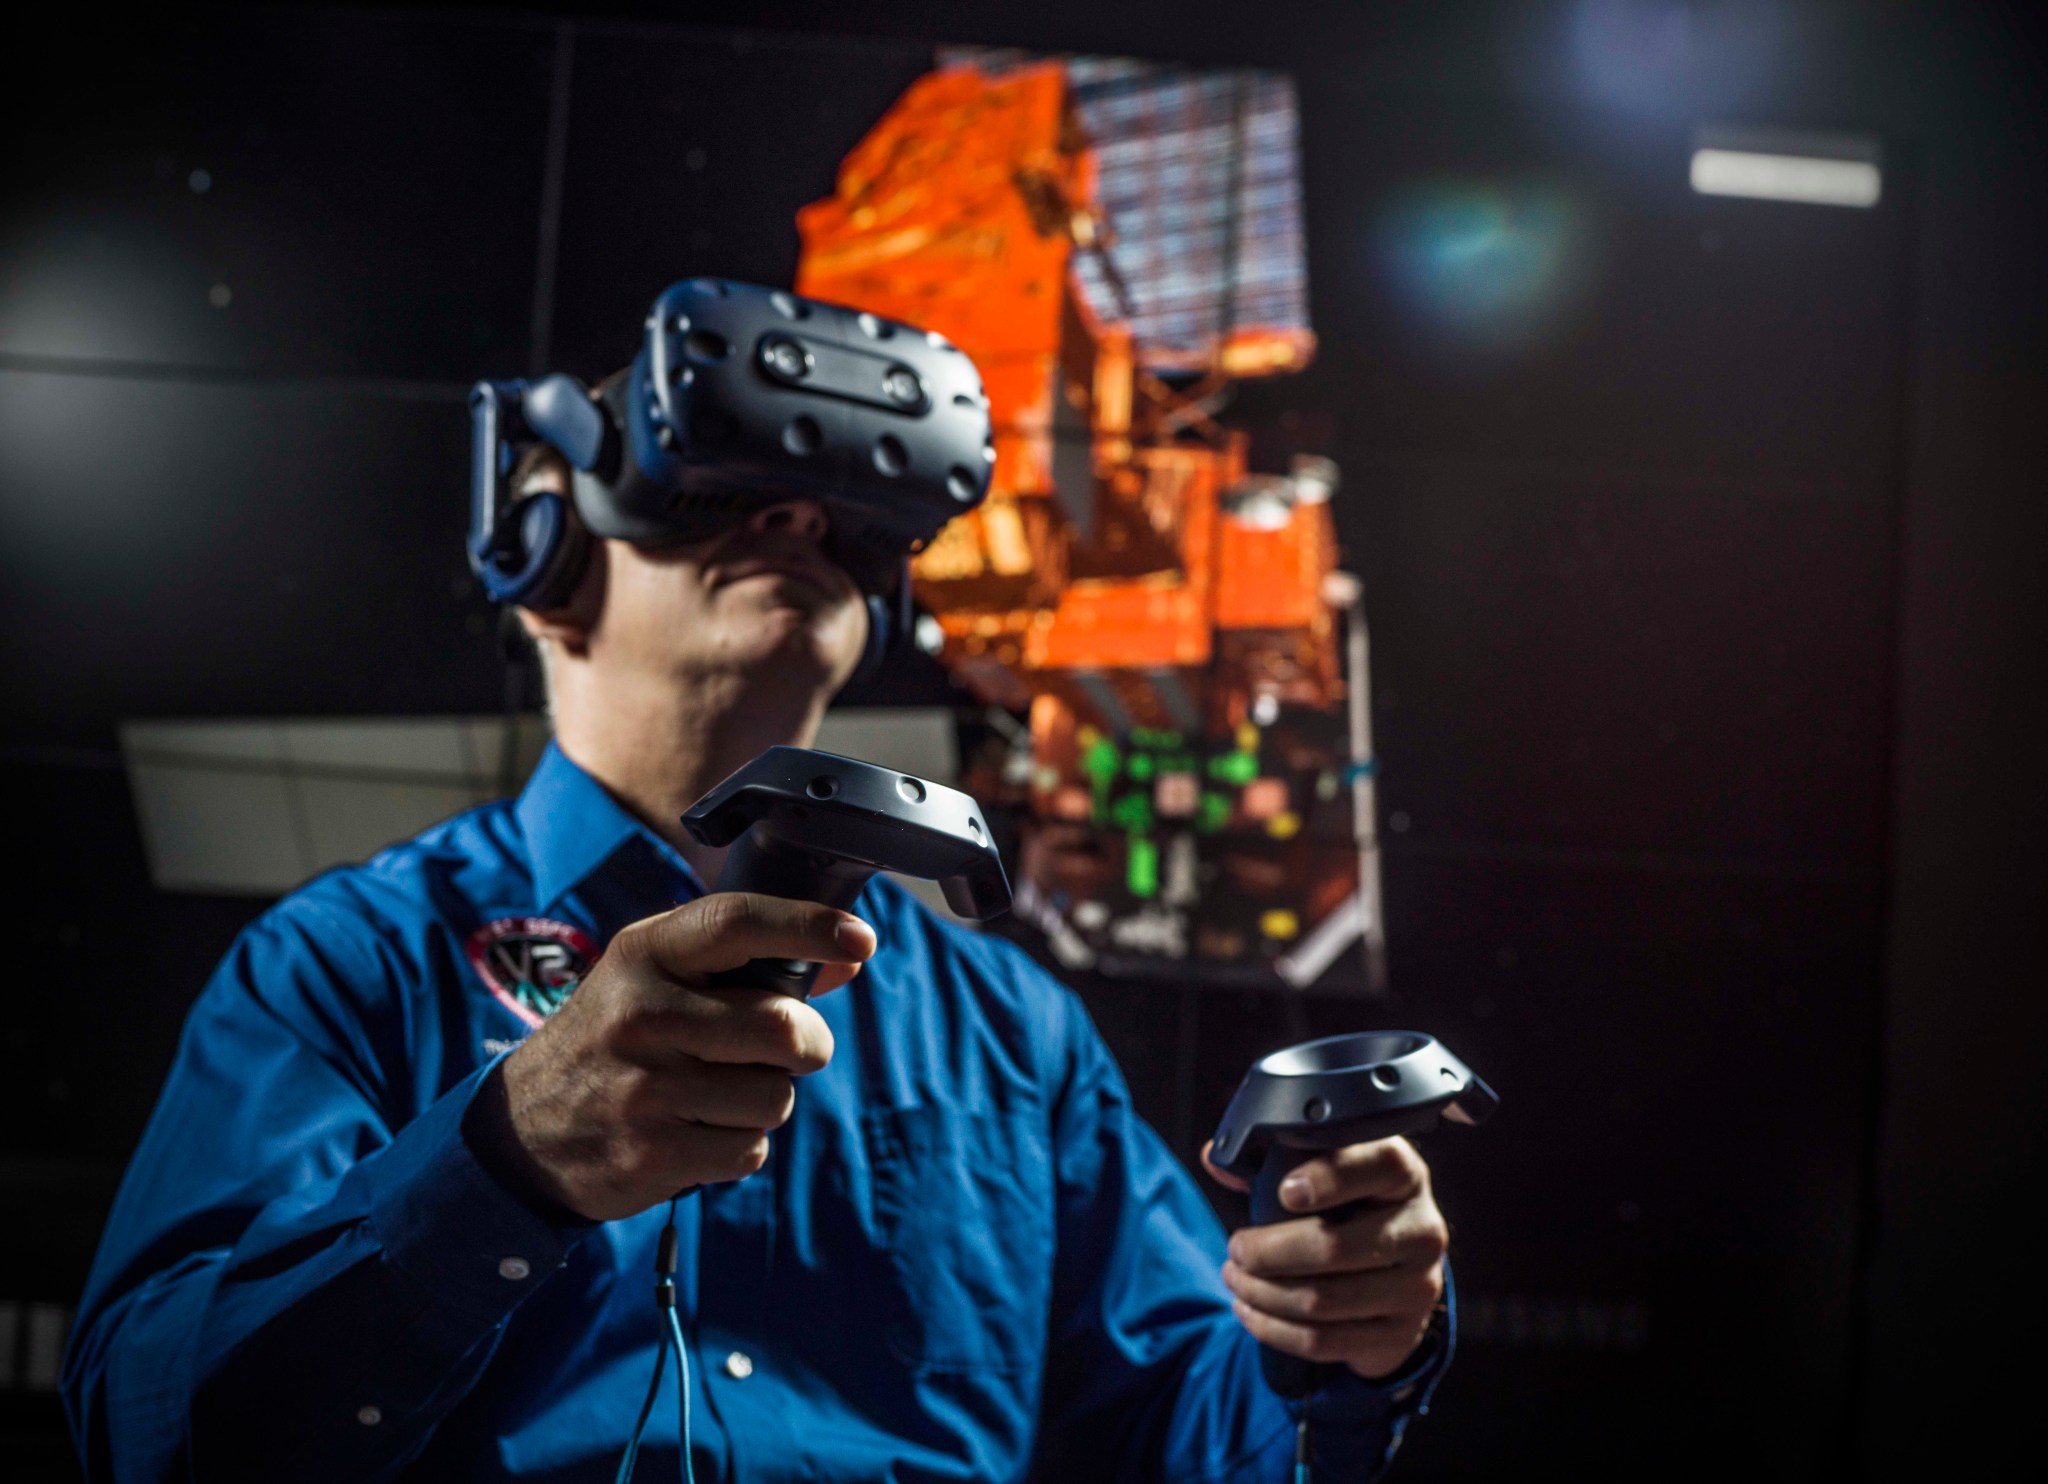 Goddard technologist Tom Grubb wearing VR goggles and holding hand controls 